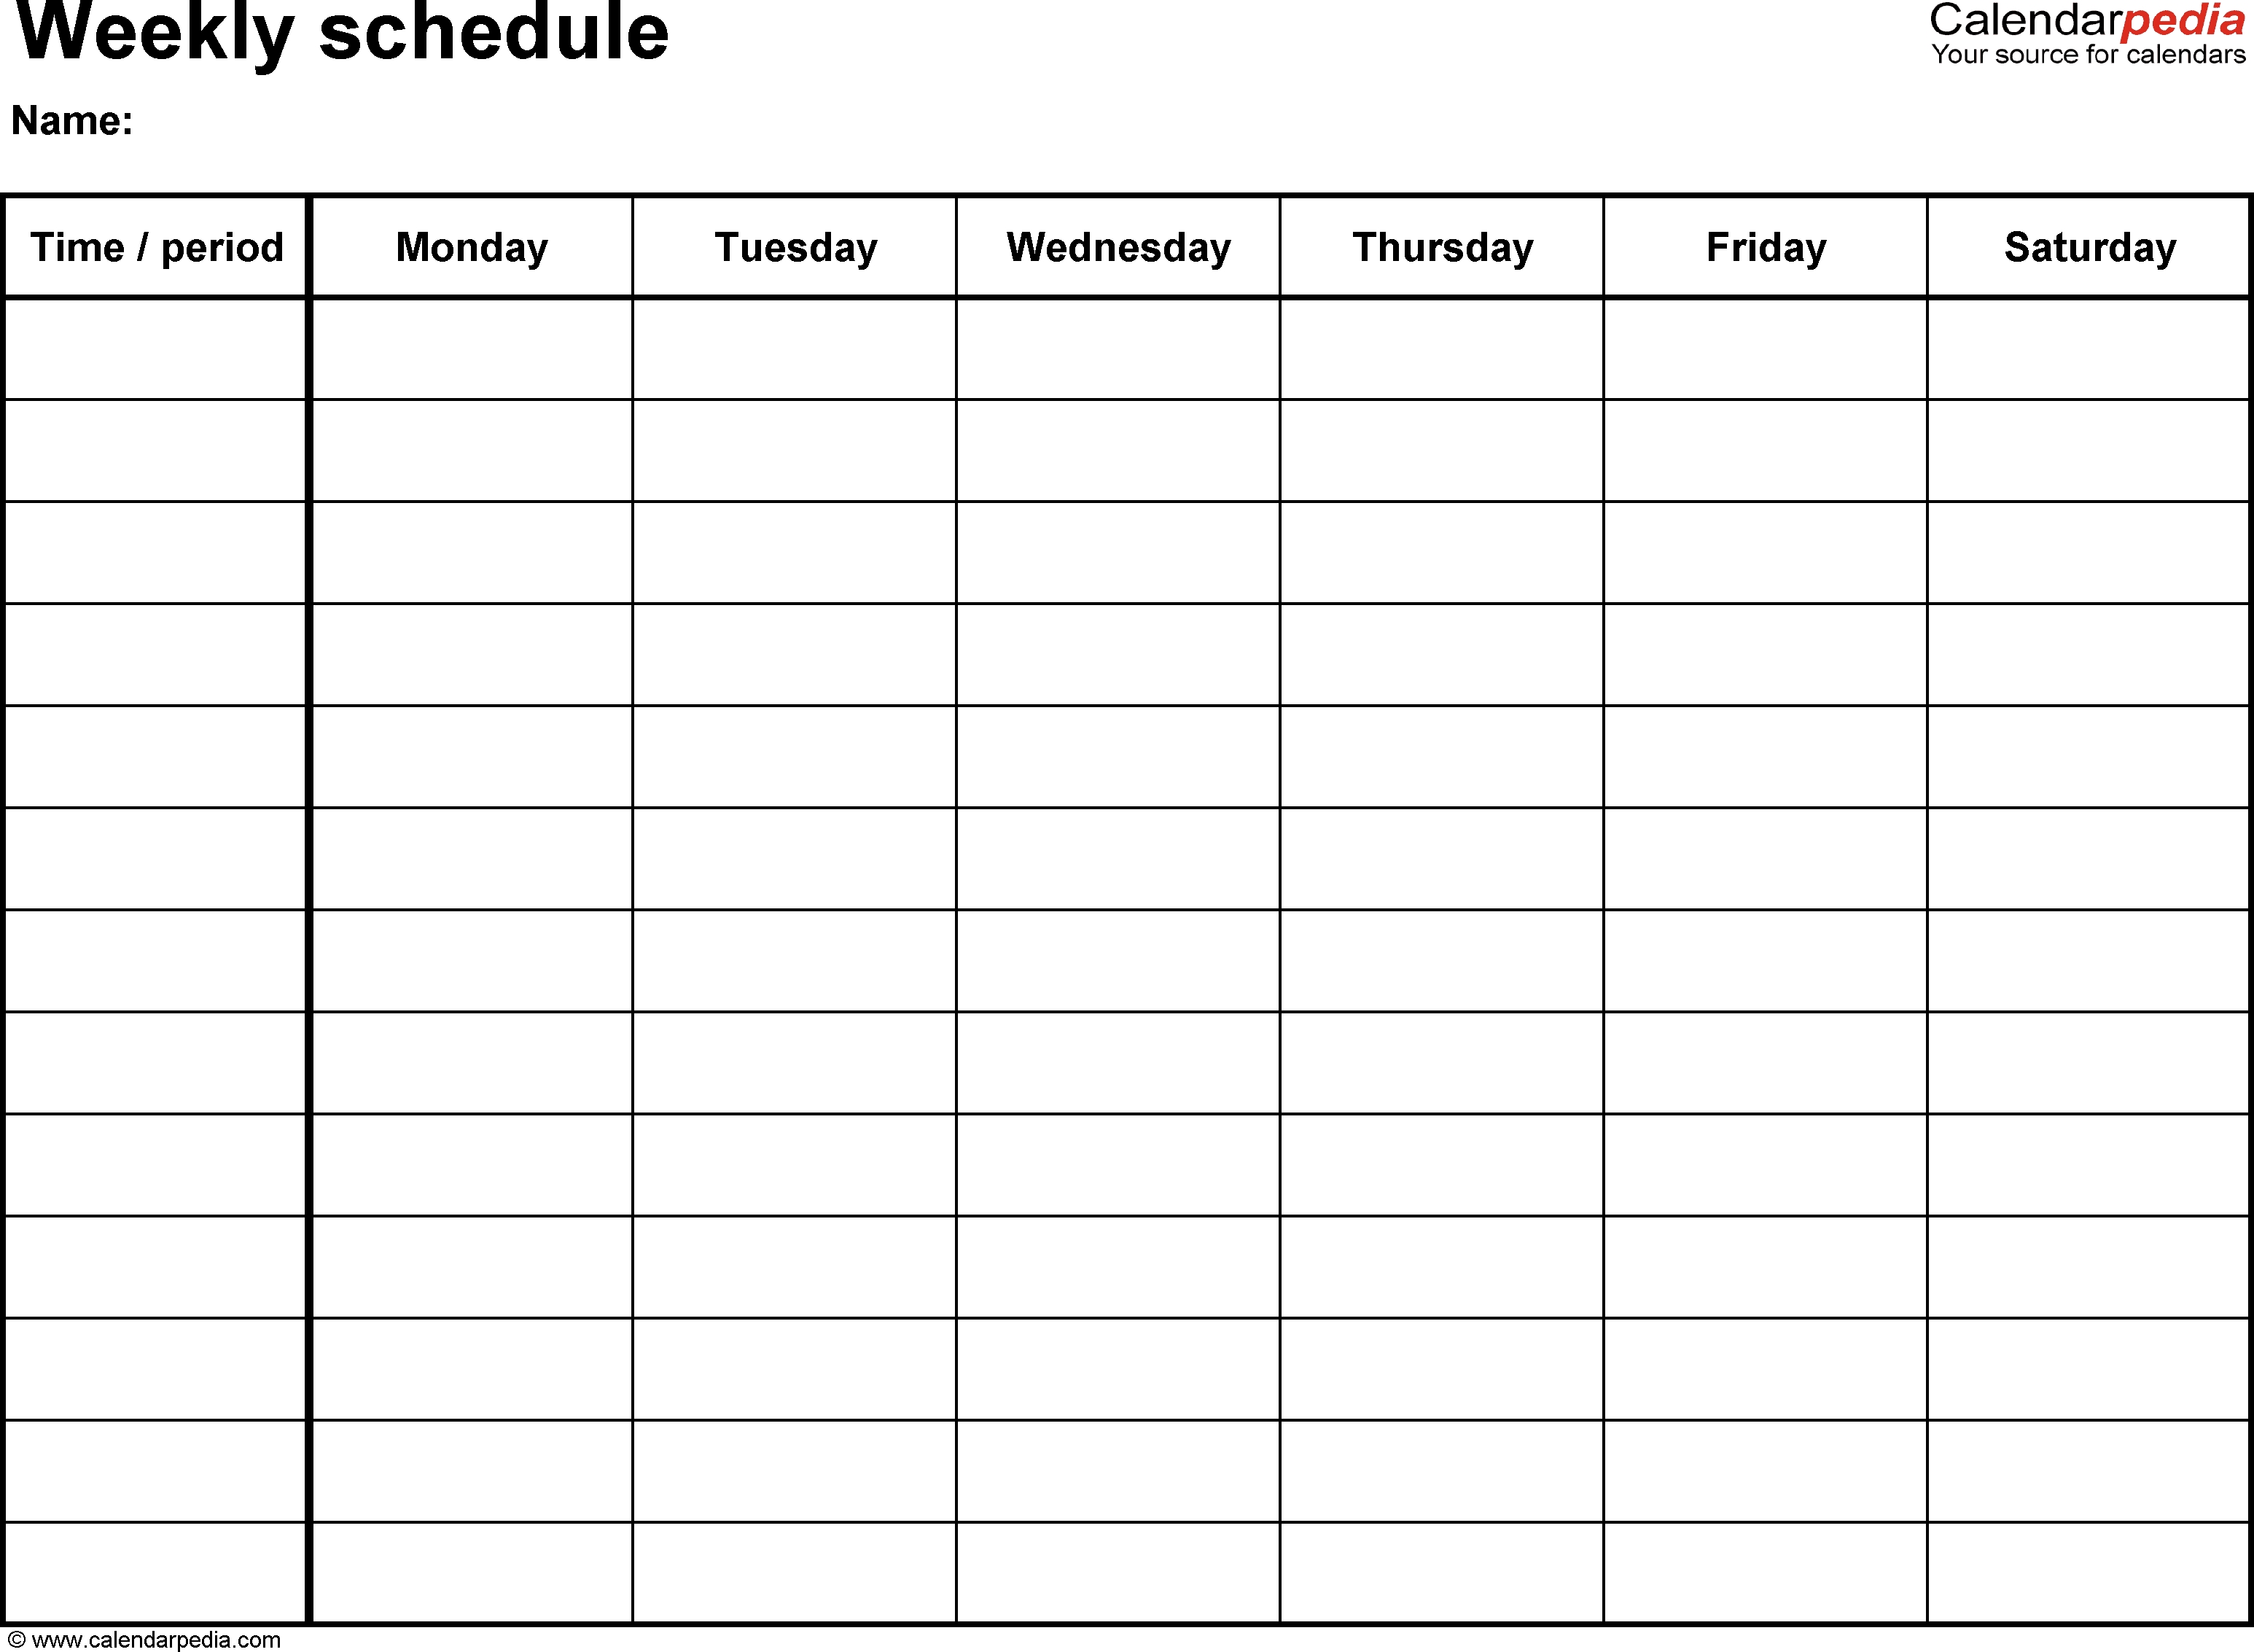 Free Weekly Schedule Templates For Pdf - 18 Templates  Calendar Blank Printable Monday Start A4